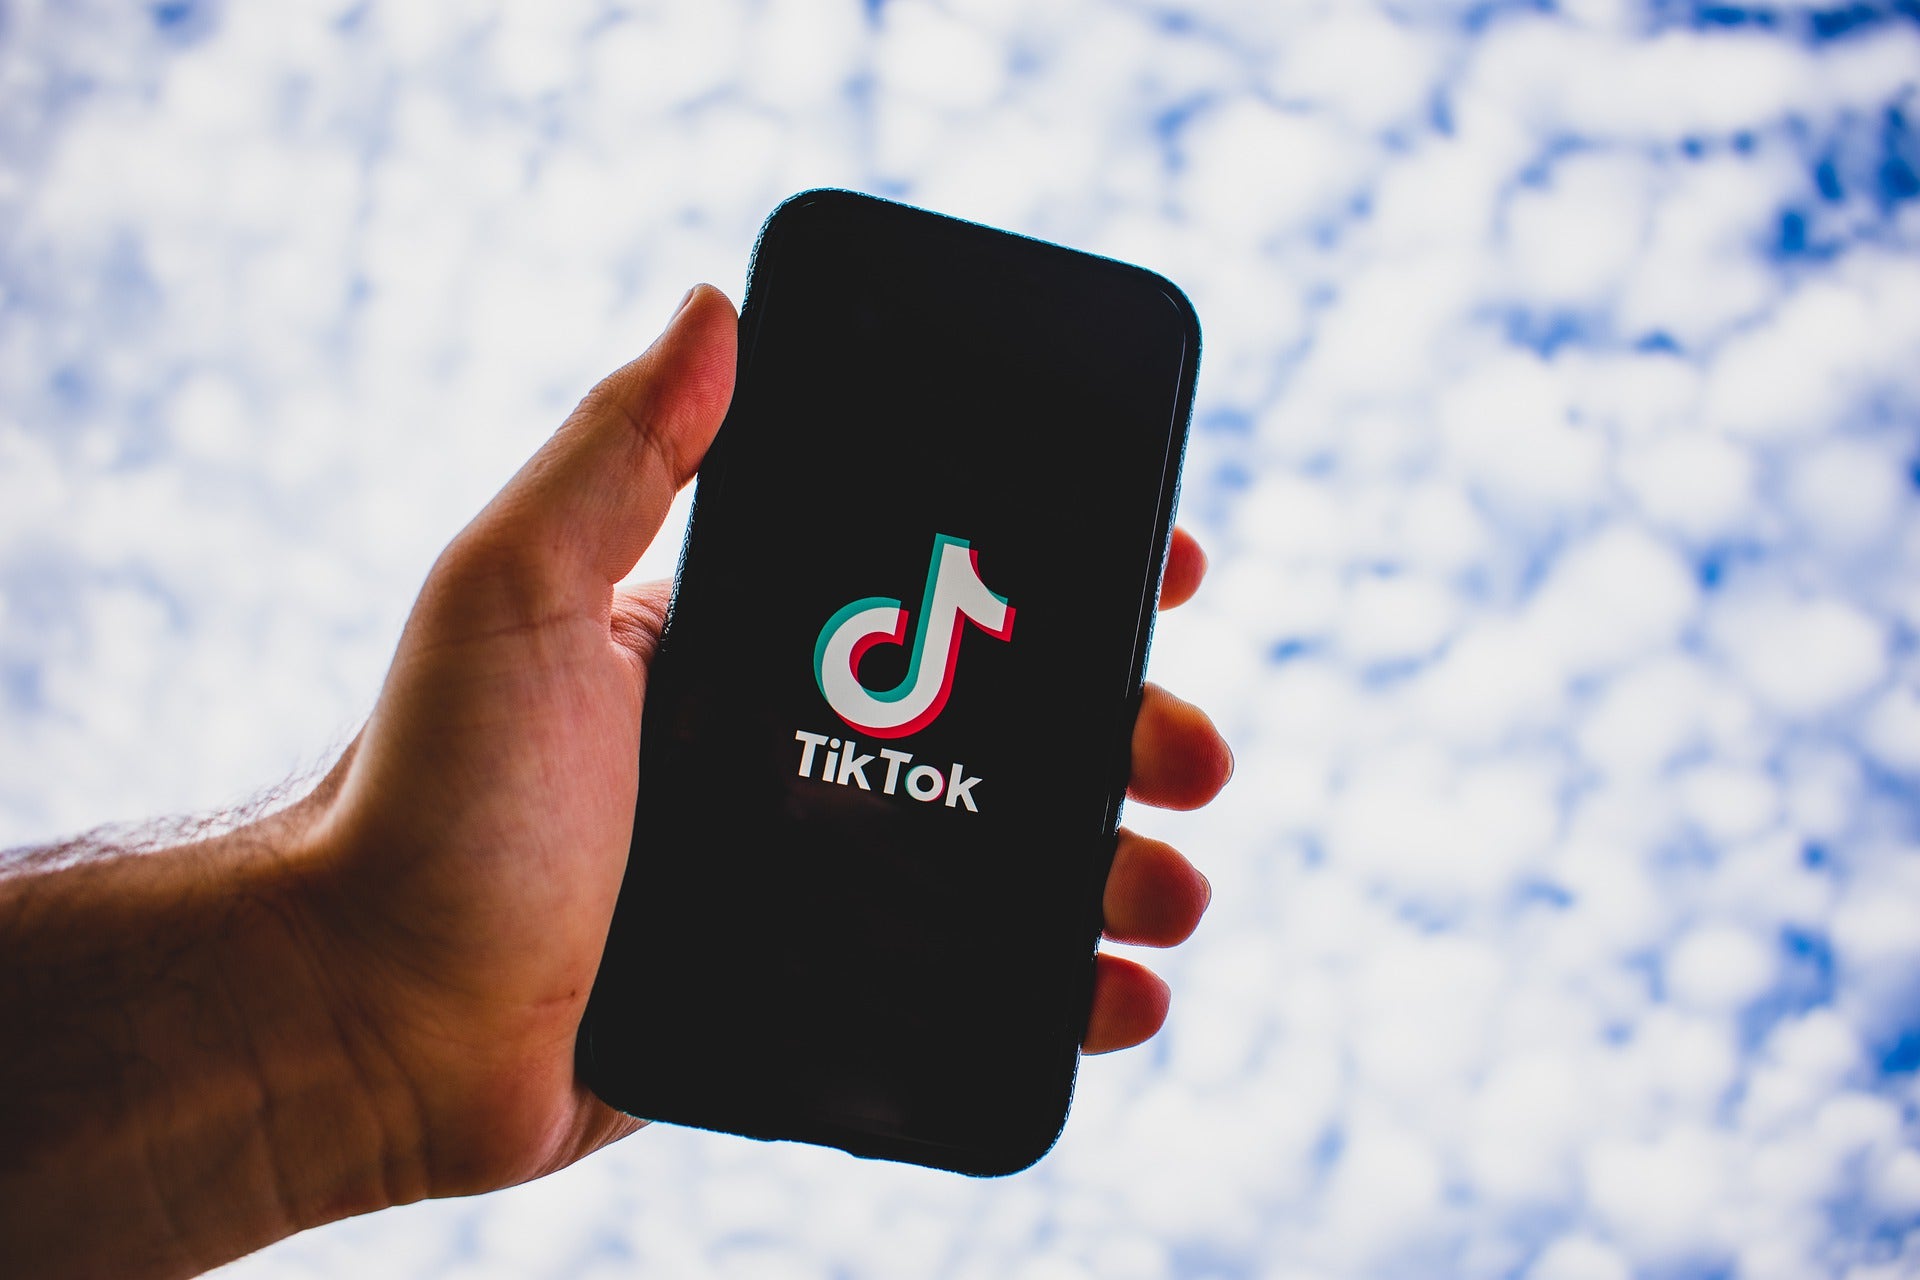 Meta Hired GOP Consulting Firm To Badmouth TikTok In Media: Report